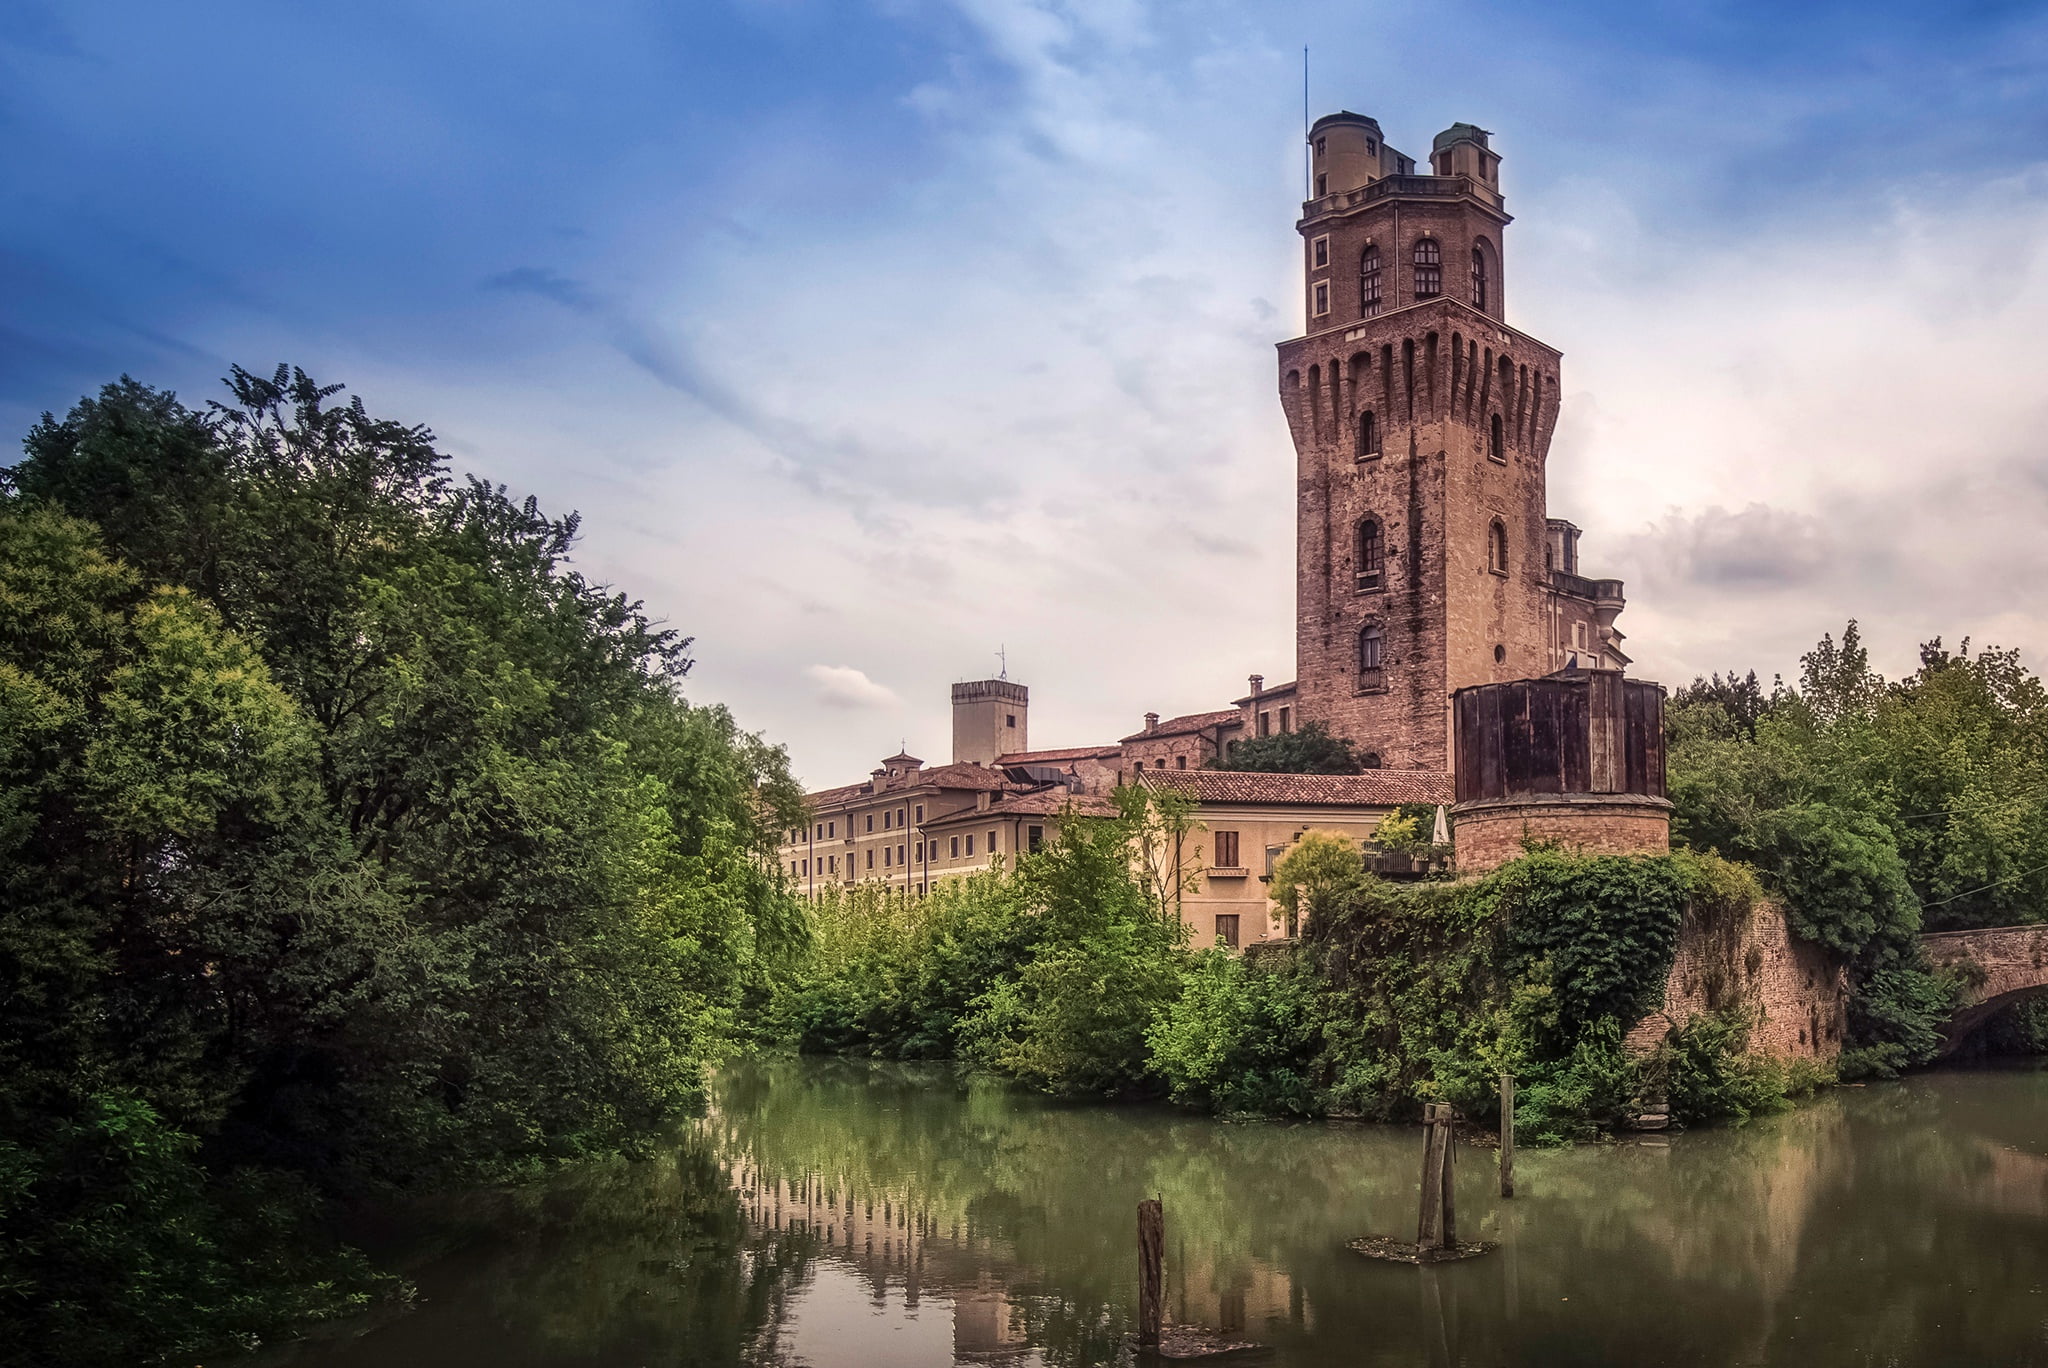 the sky, clouds, trees, river, the building, tower, Italy, Astronomical Observatory Padova